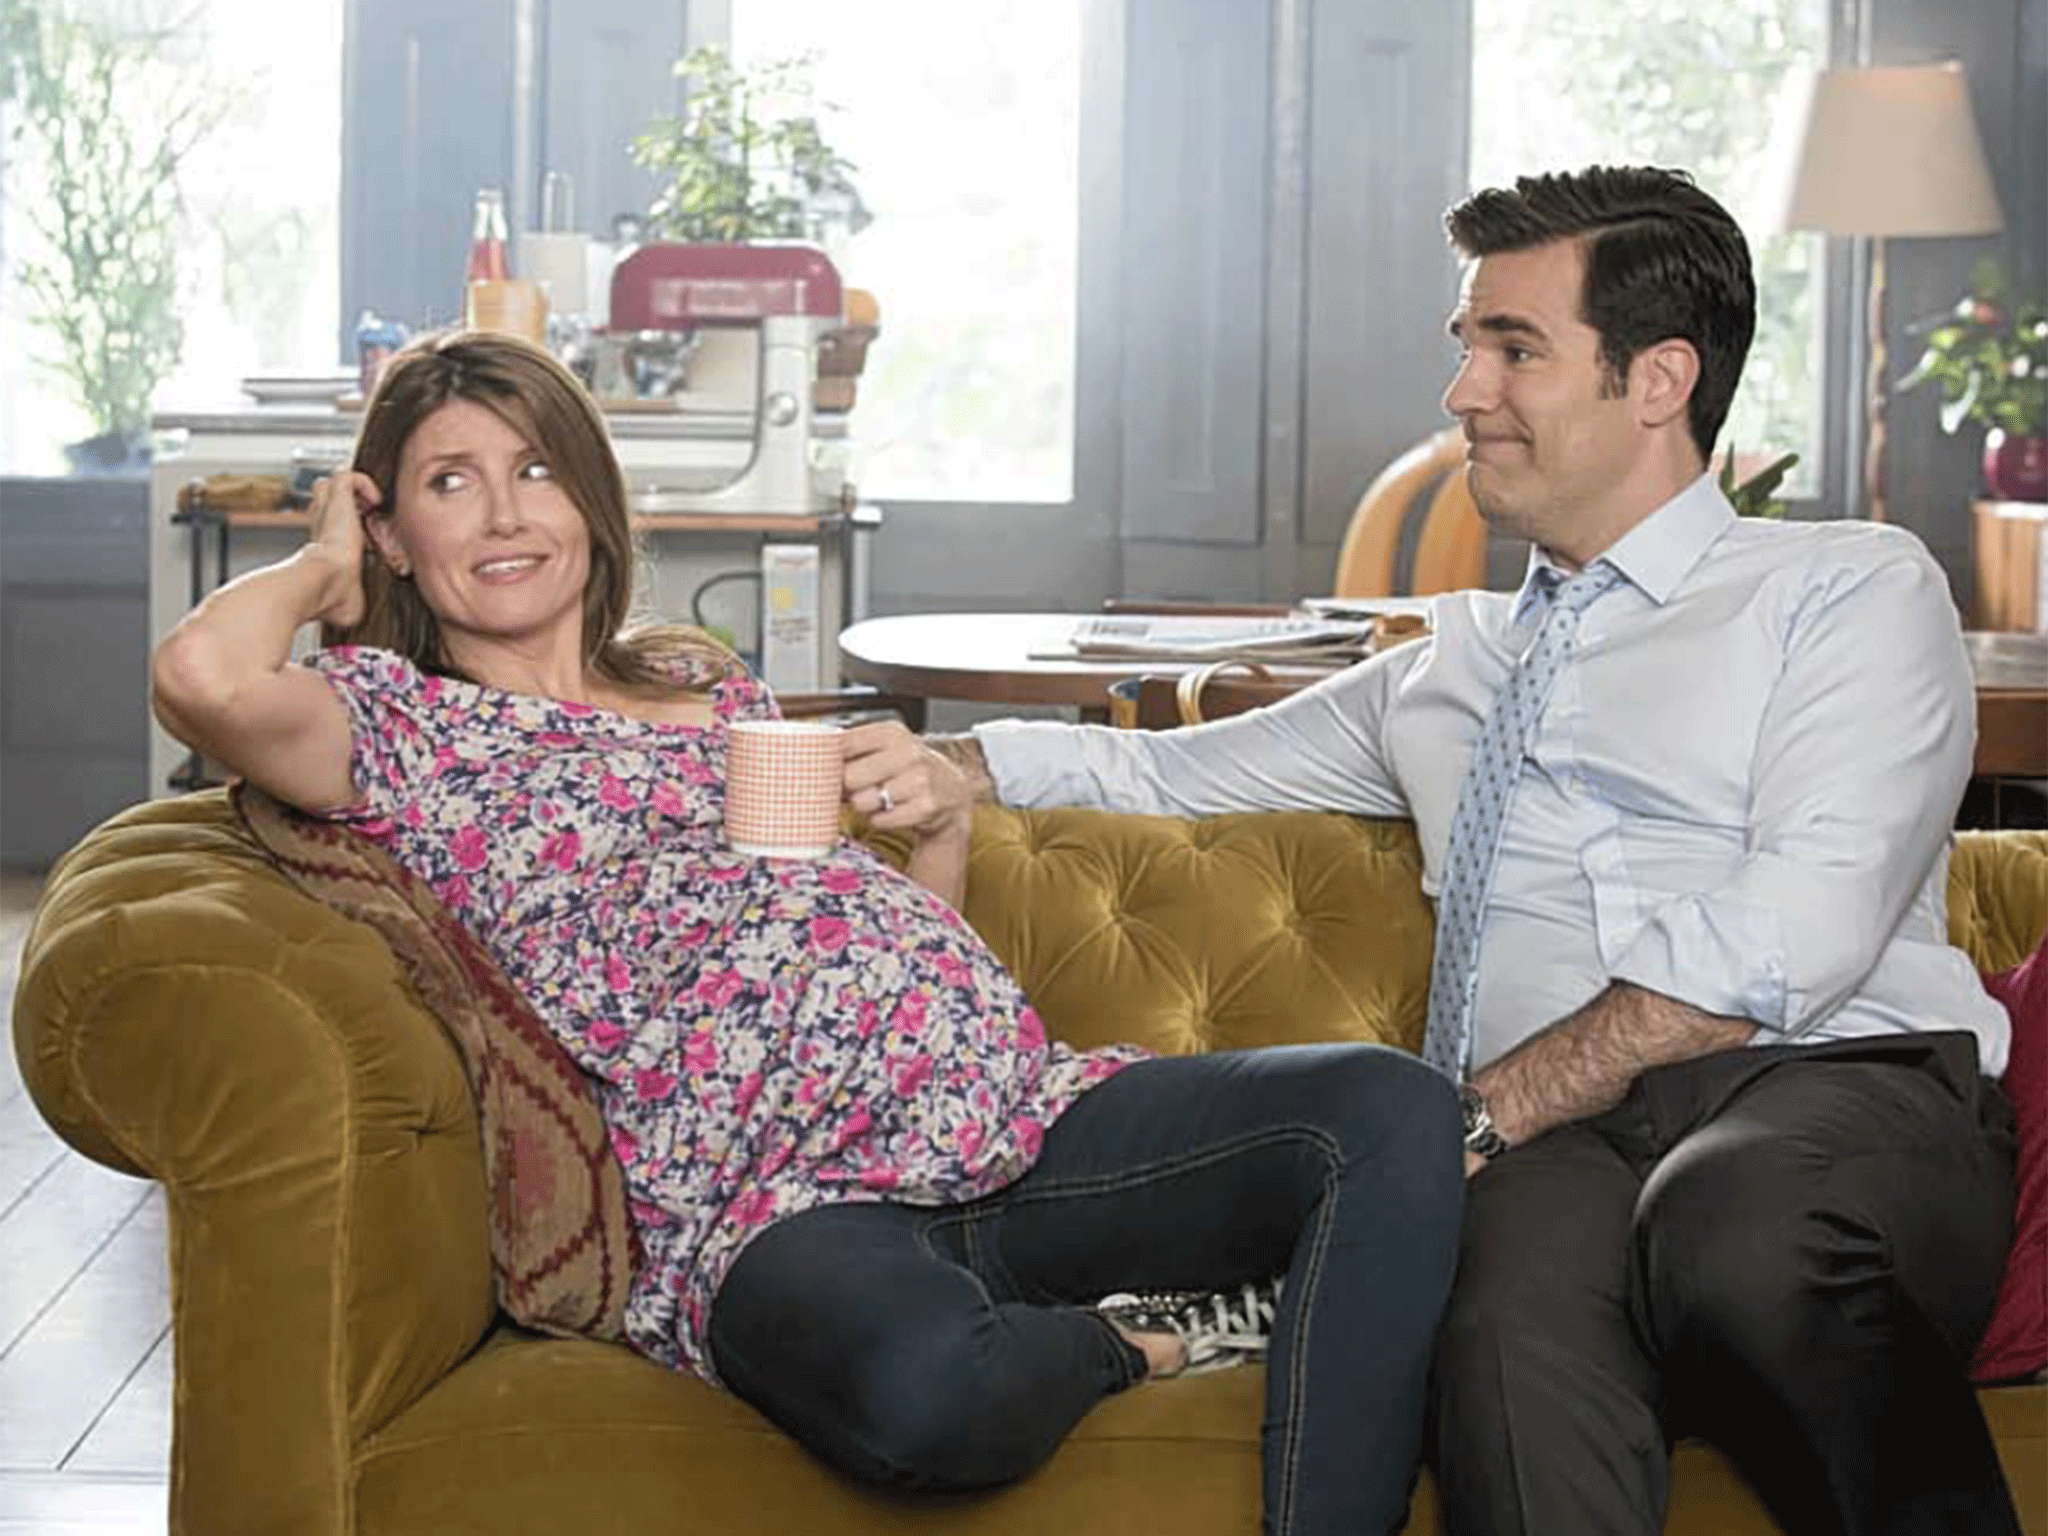 Happy families: a rare moment of calm in Channel 4 romcom ‘Catastrophe’